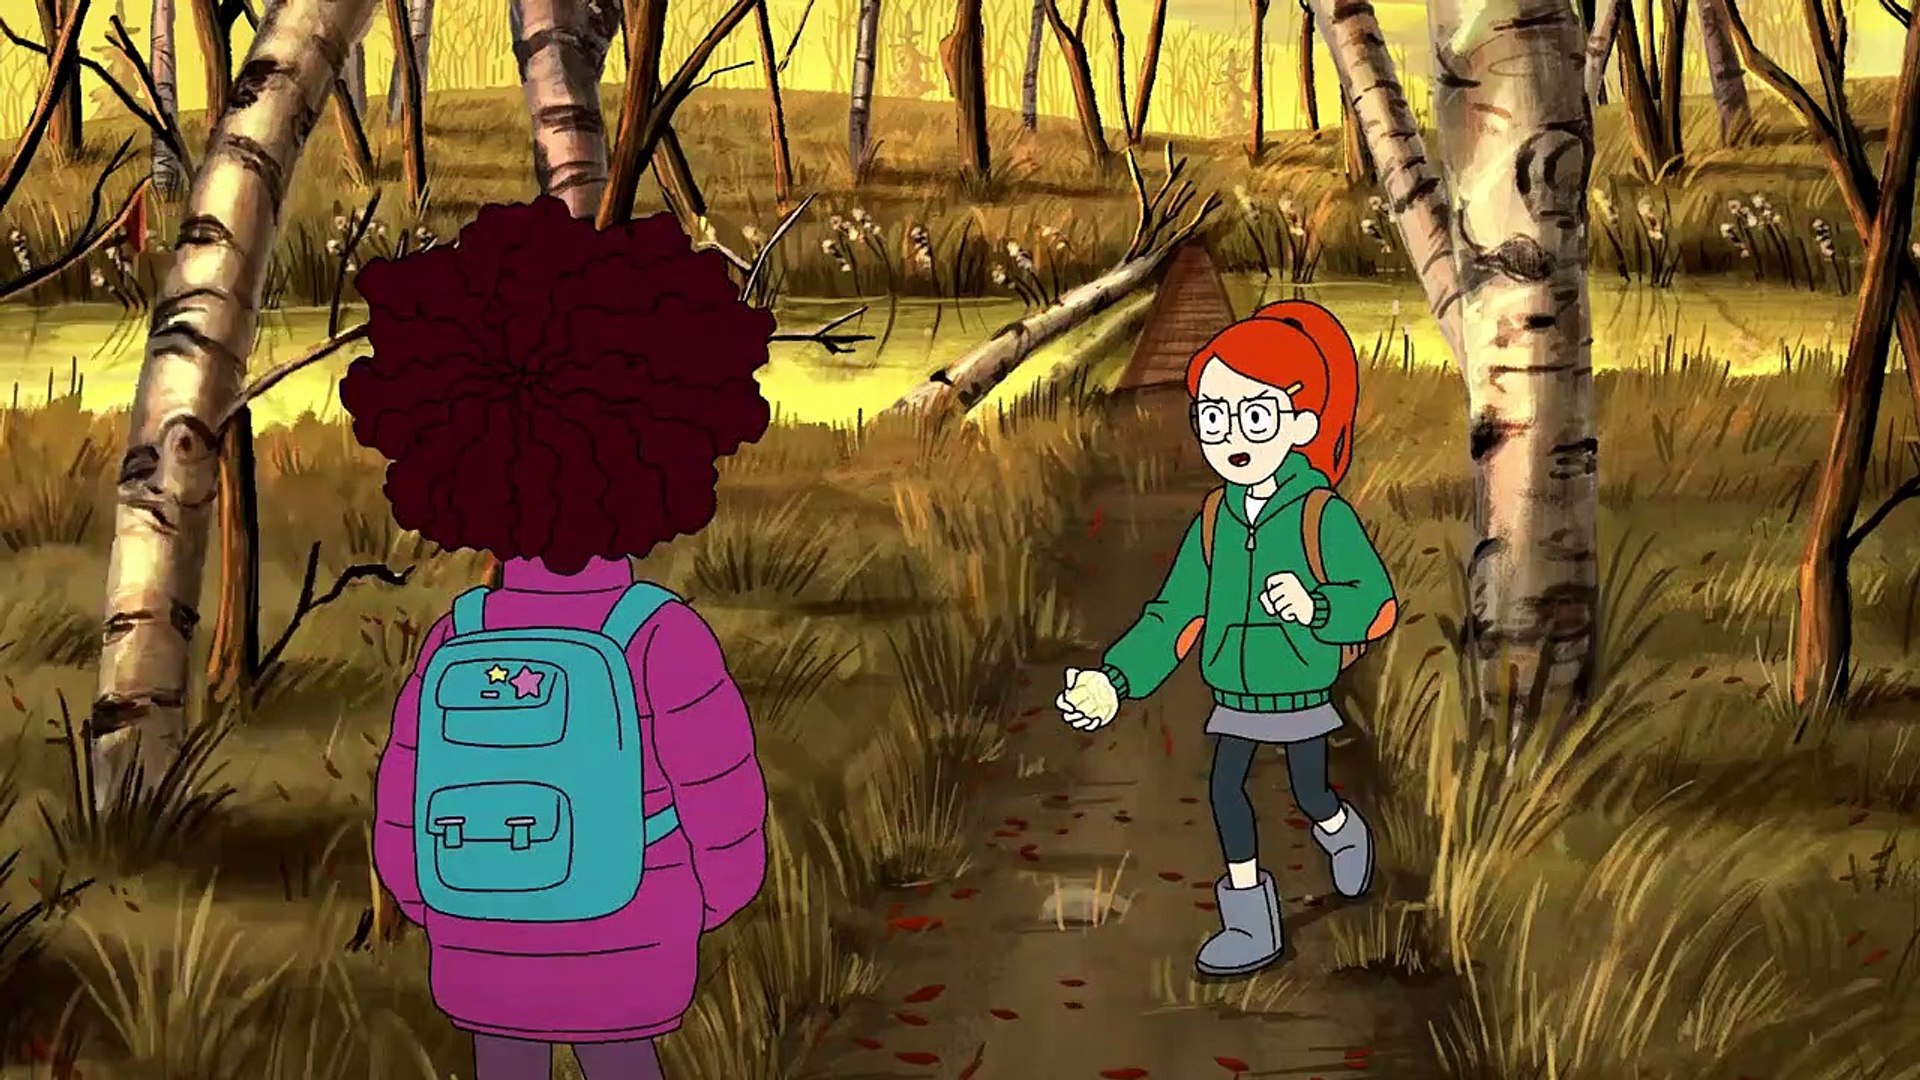 Official Infinity Train Trailer With Alternative Ending